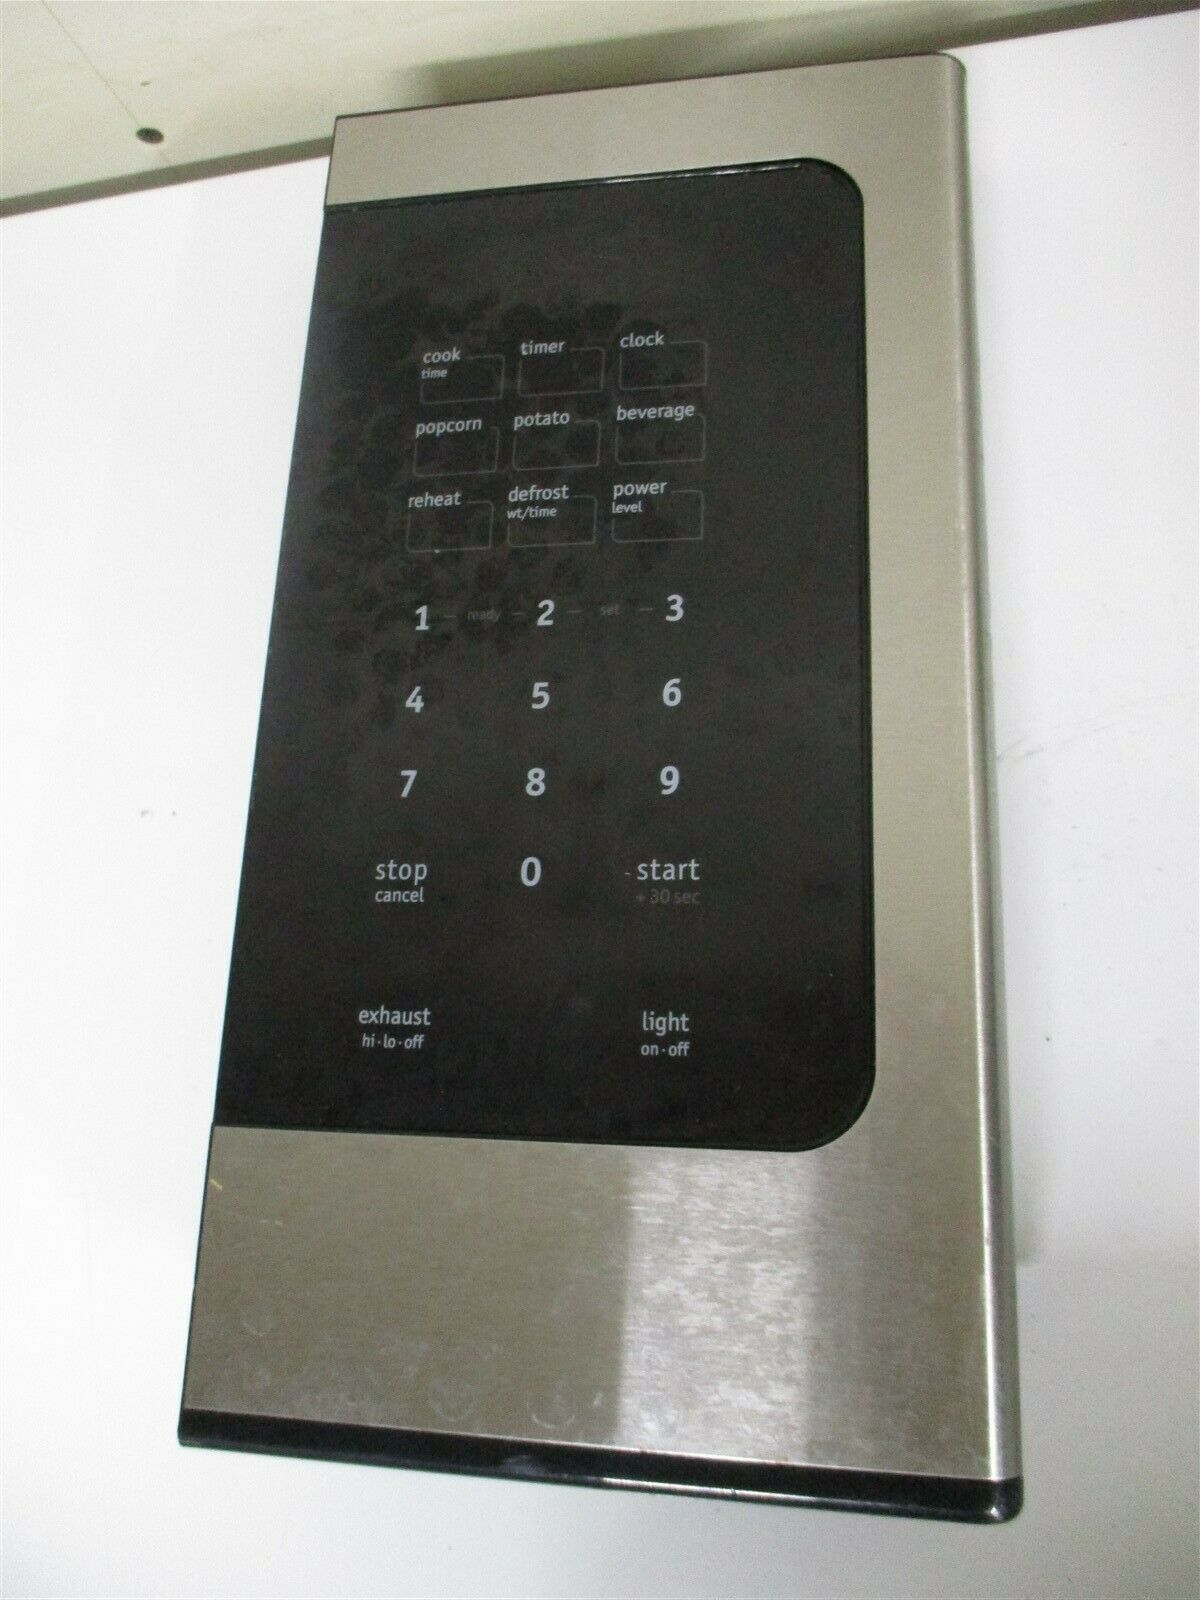 FRIGIDAIRE MICROWAVE CONTROL PANEL SCRATCHES # 5304499542 5304477390 MD12001LB - $255.00